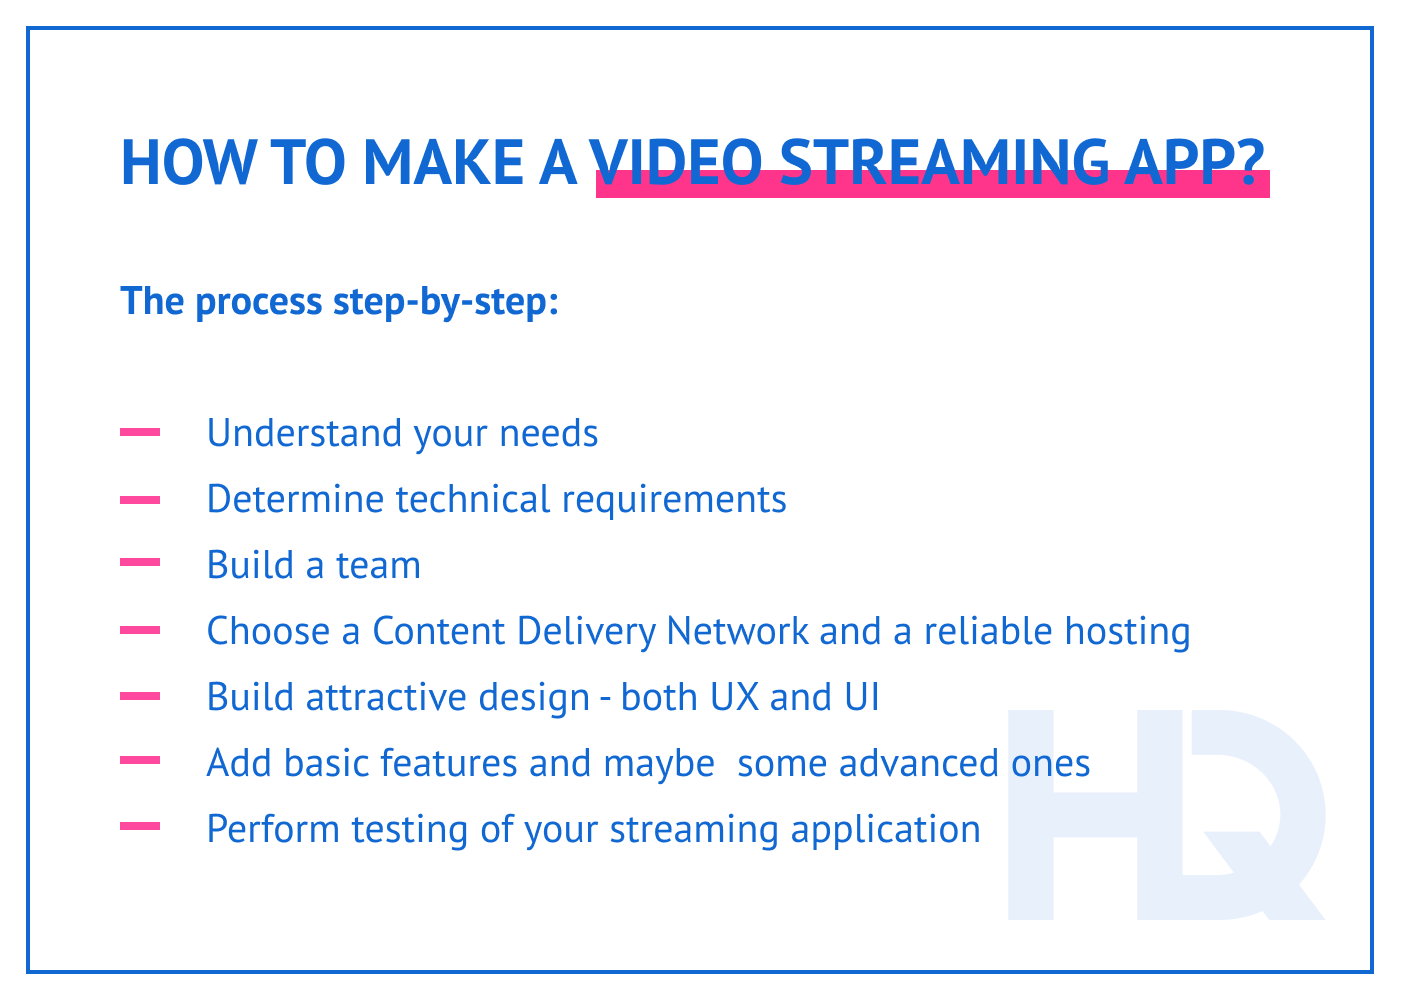 How to make a video streaming app?